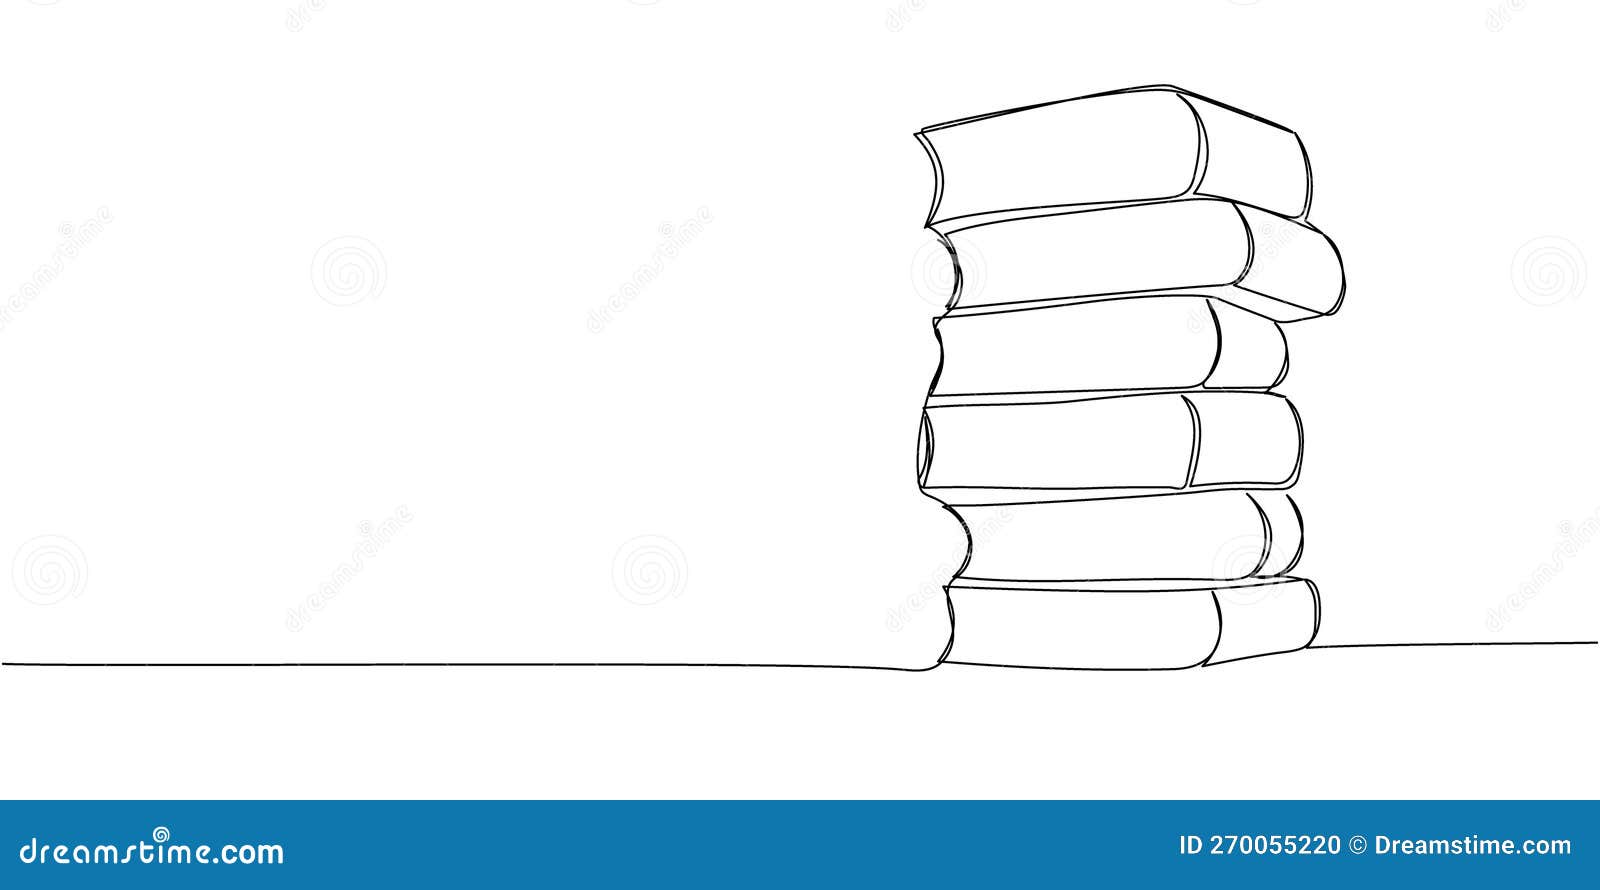 https://thumbs.dreamstime.com/z/stack-big-books-volumes-one-line-art-continuous-drawing-book-library-education-school-study-literature-paper-textbook-read-270055220.jpg